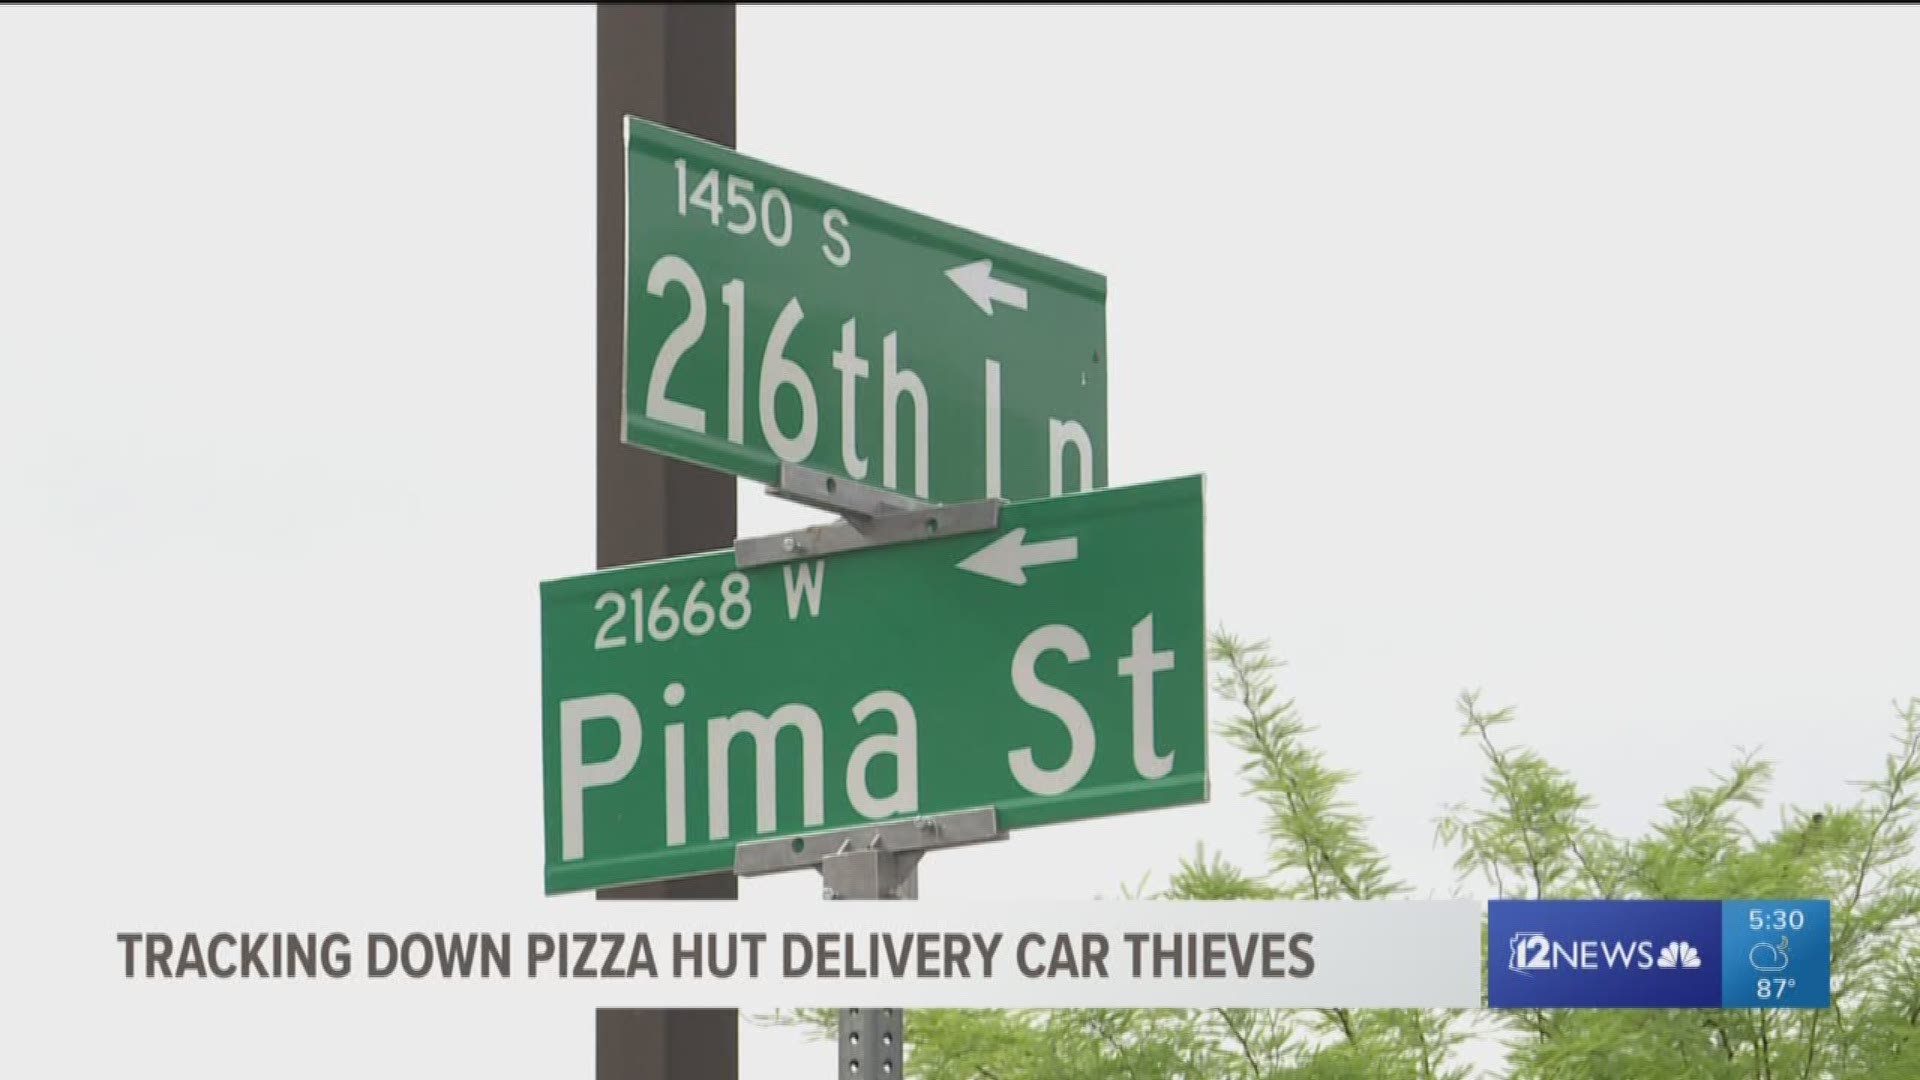 Pizza Hut employee Brianne Sargent was called to delivery pizza to a home in Buckeye. When she turned around, she saw someone driving away in her car.